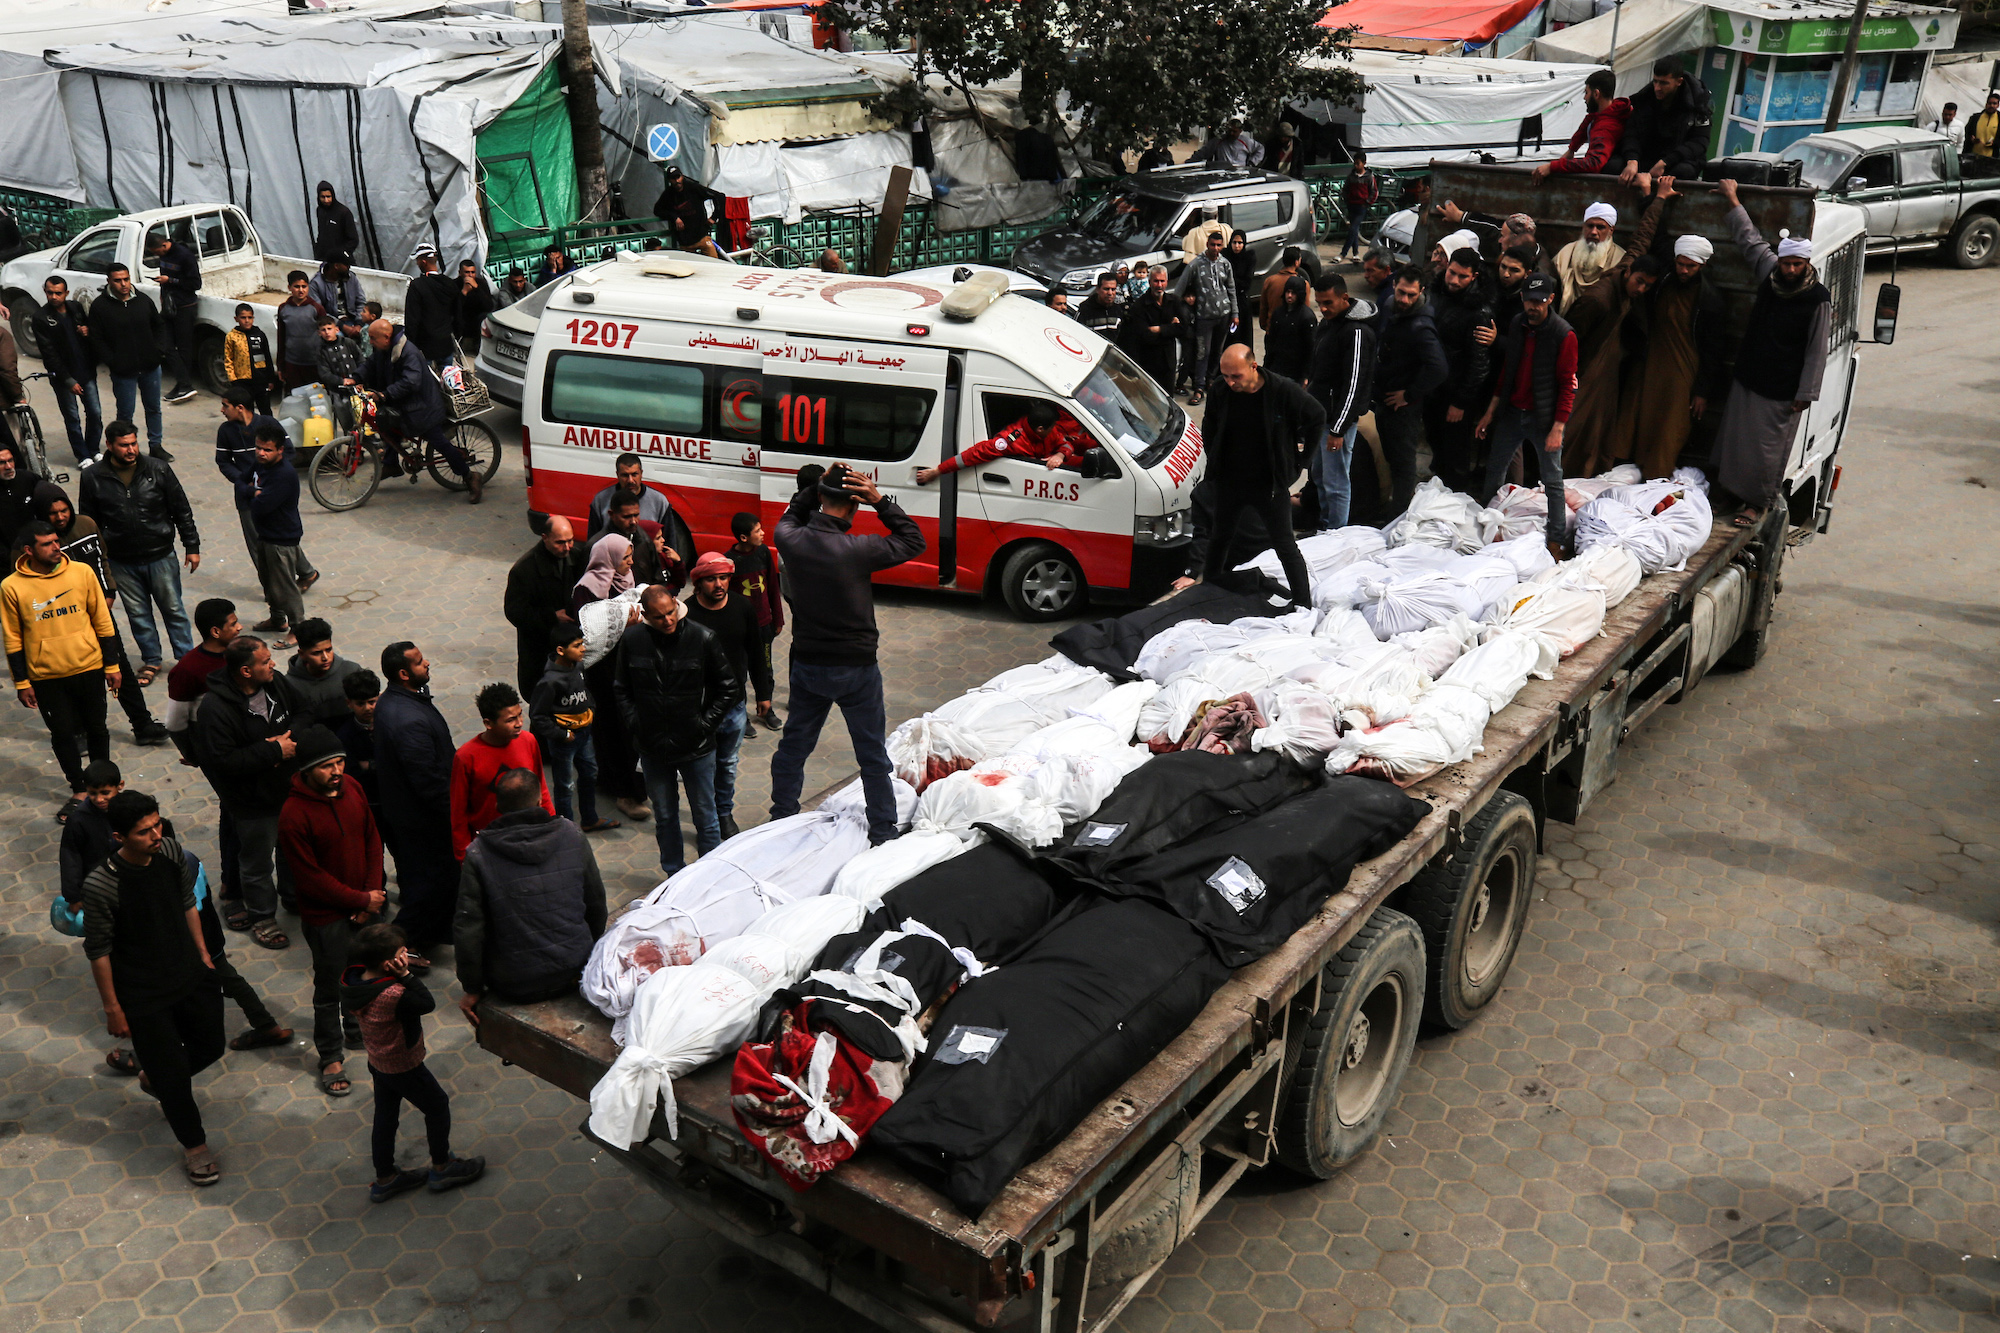 Palestinians are seen transporting the bodies during a mass funeral at the Al-Aqsa hospital in Gaza on March 16.